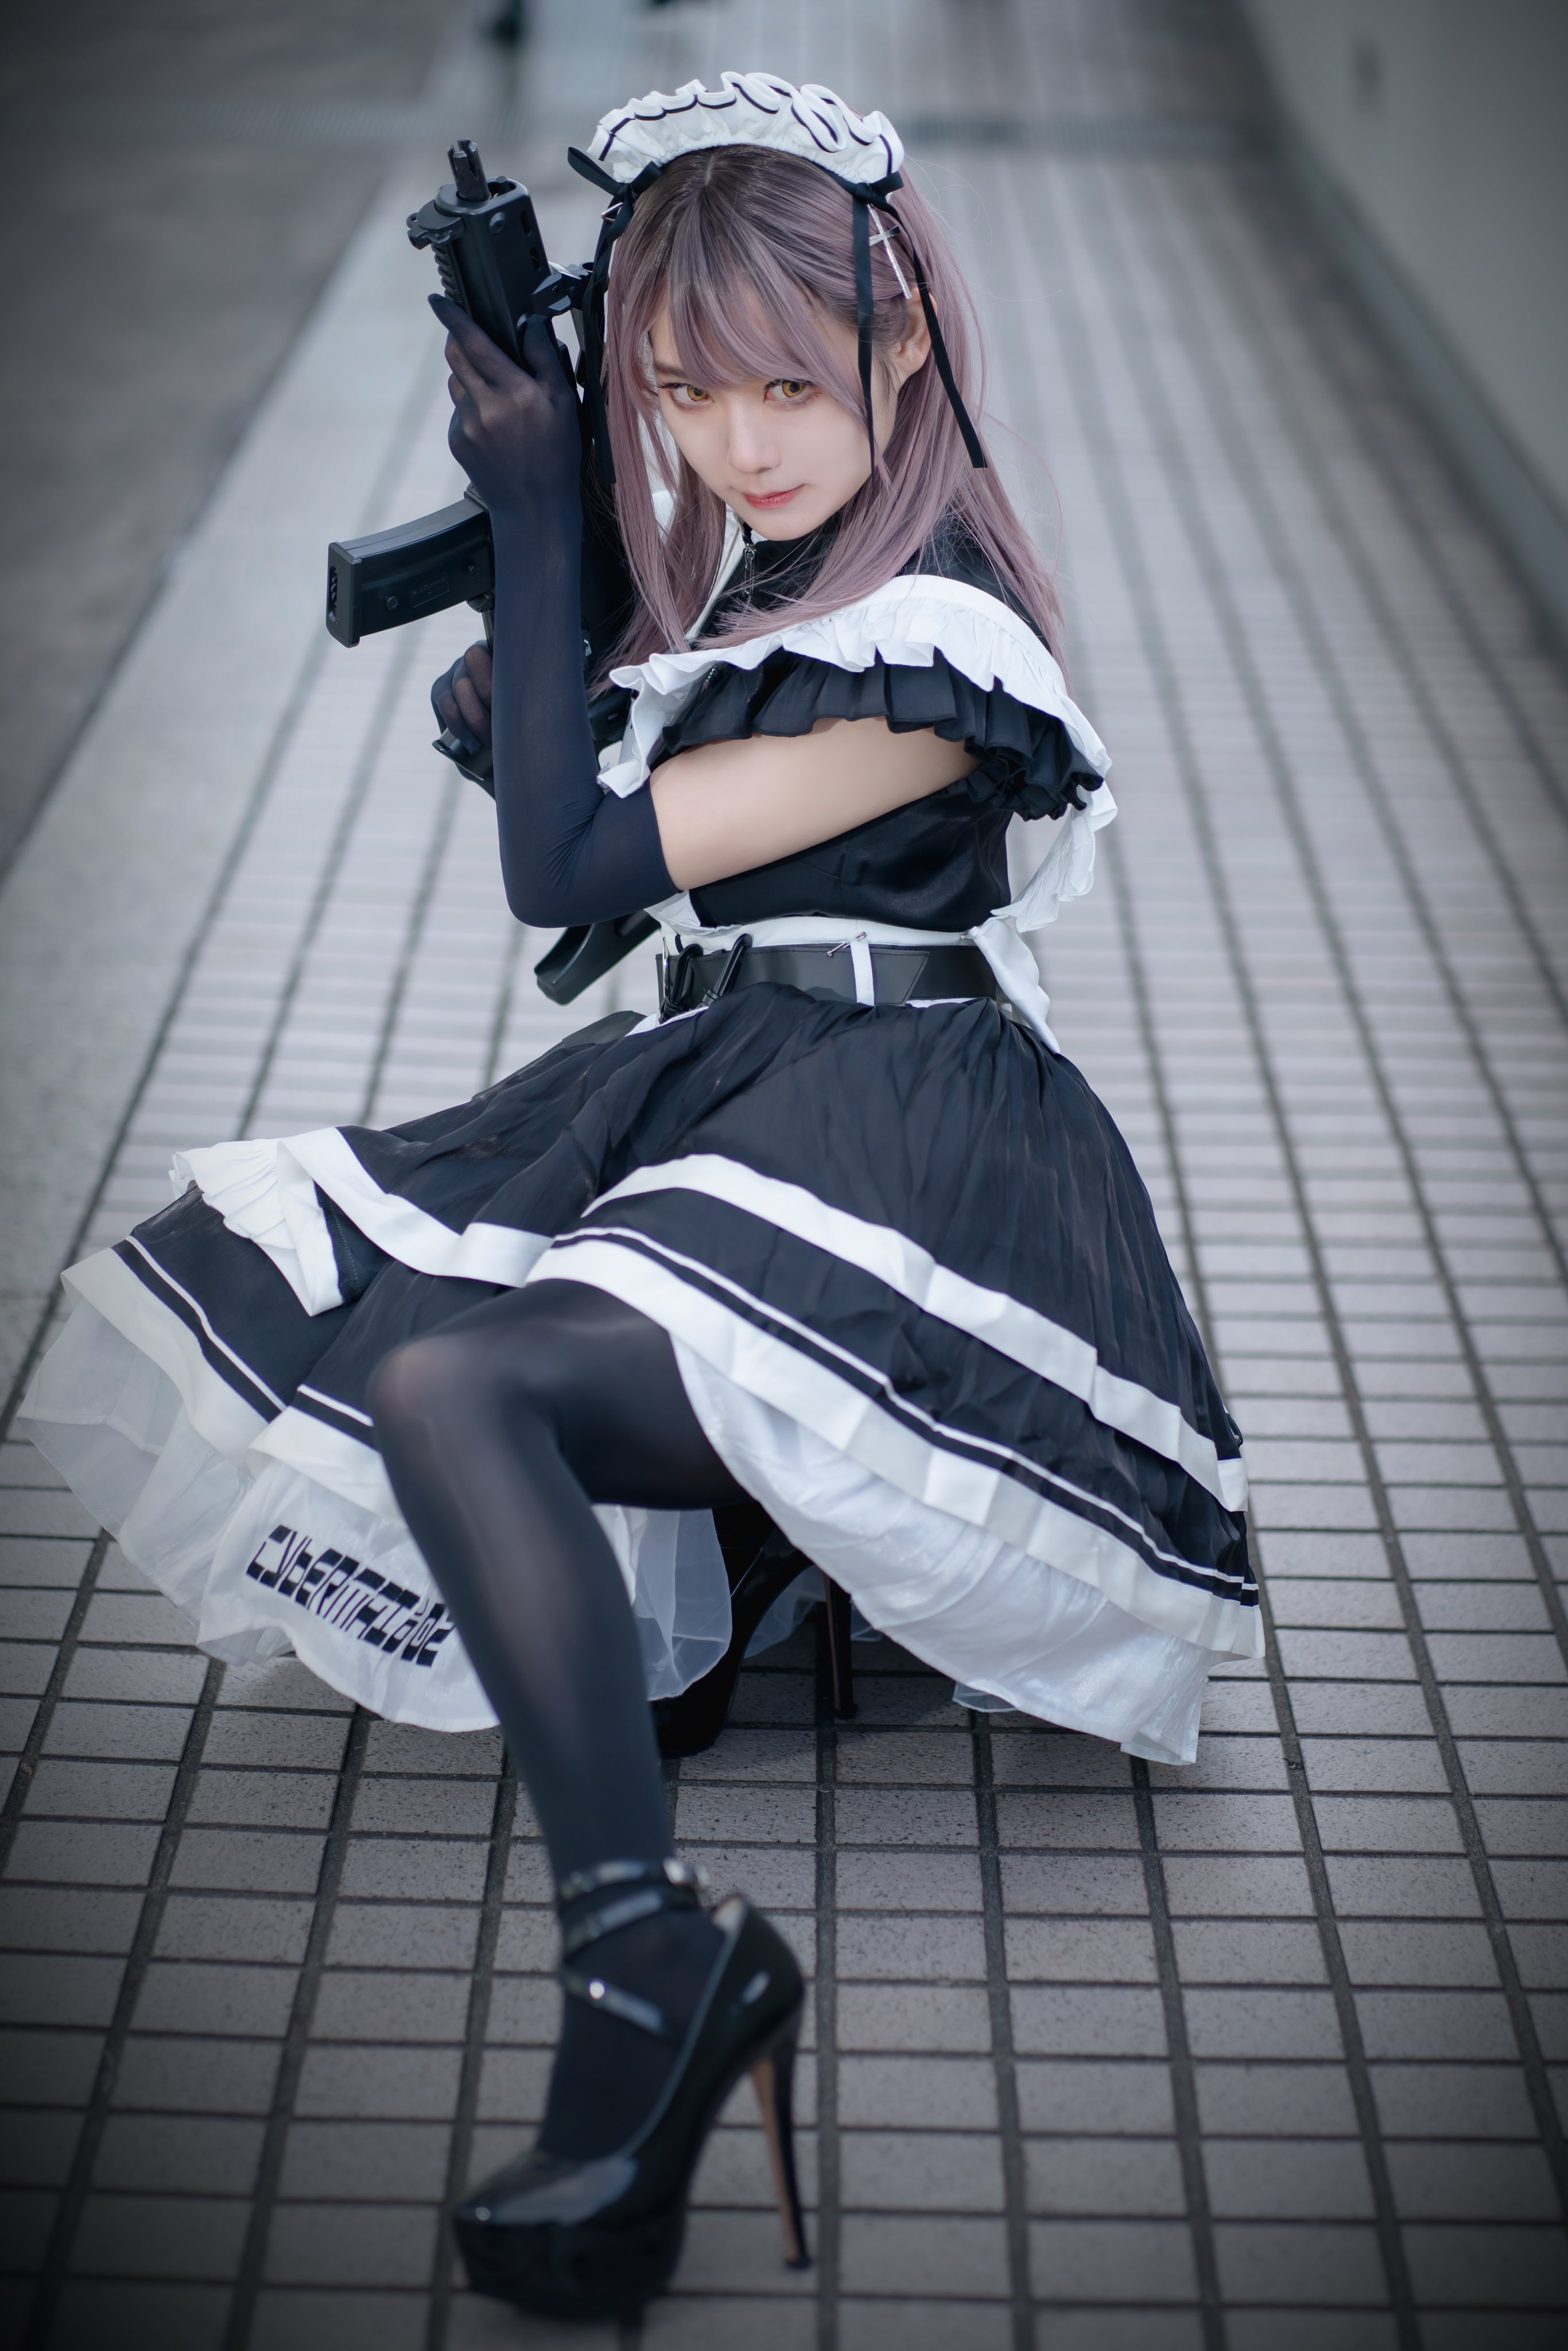 cosplayer maid outfit @non_caffeine96